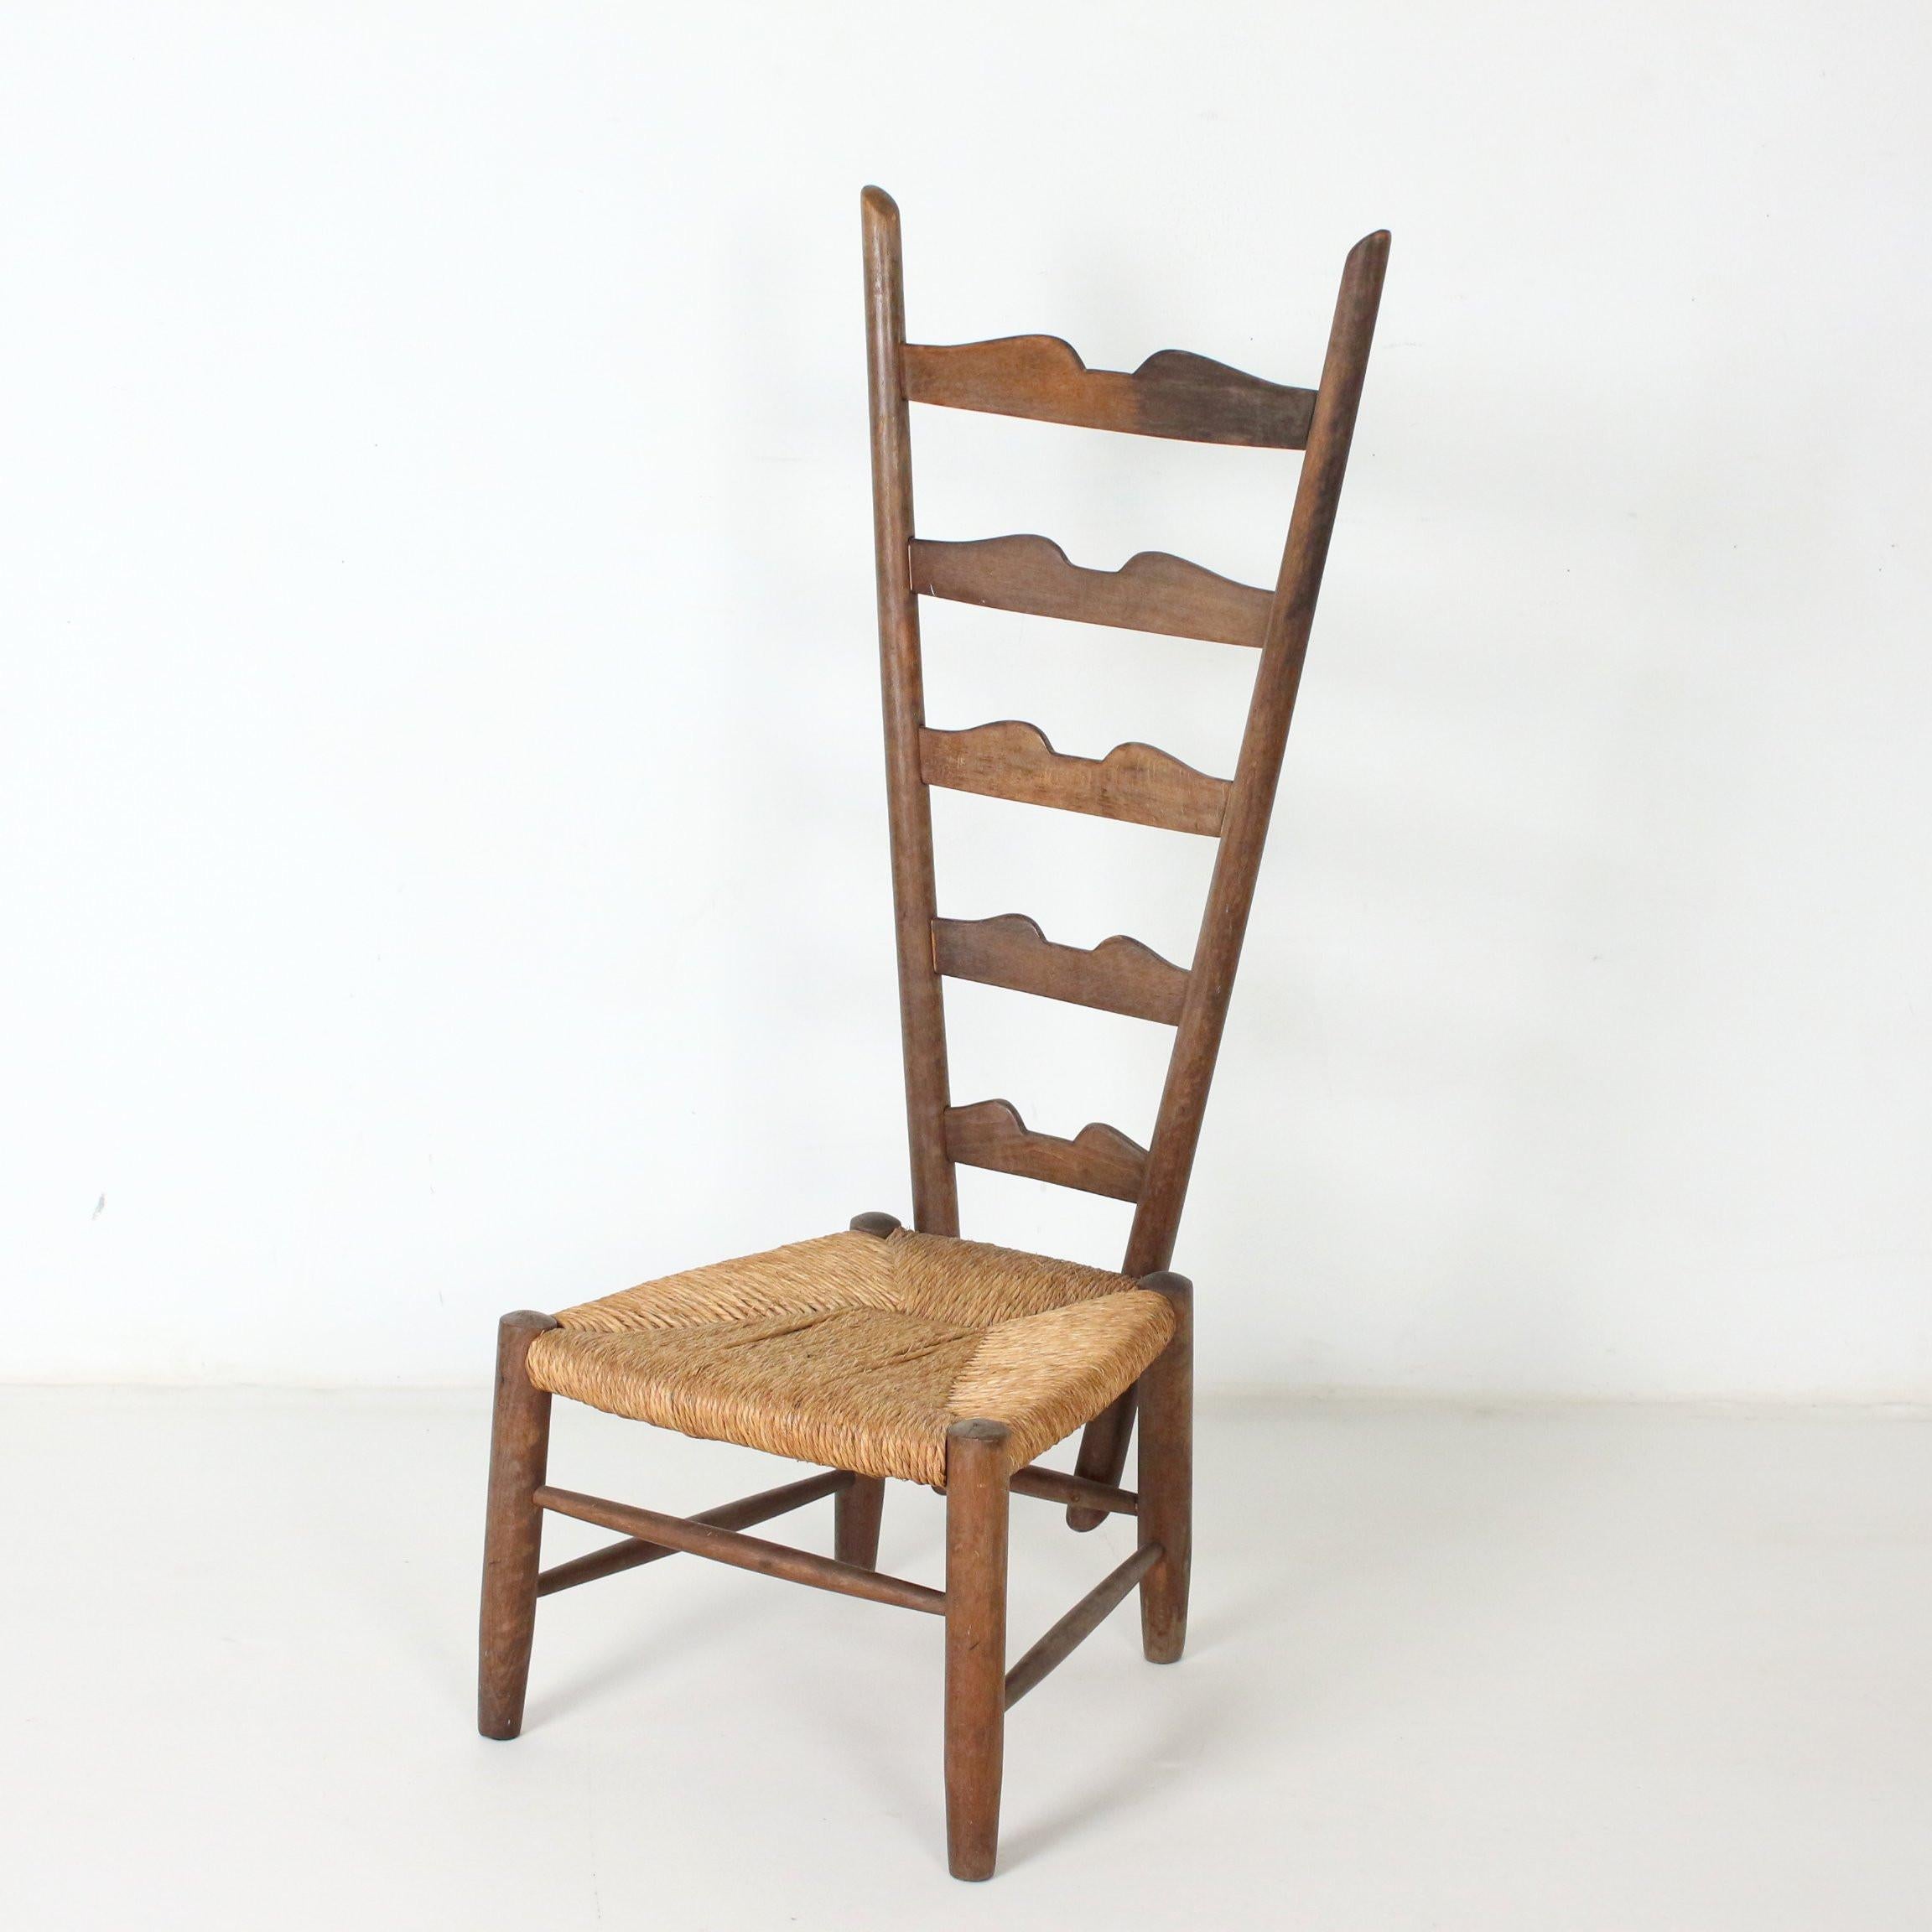 Gio Ponti designed chair with high ladder back typical of Ponti's style. Dark, stained wood frame with rush wicker seat. Manufactured for Casa E Giardino, Milan, Italy 1939.